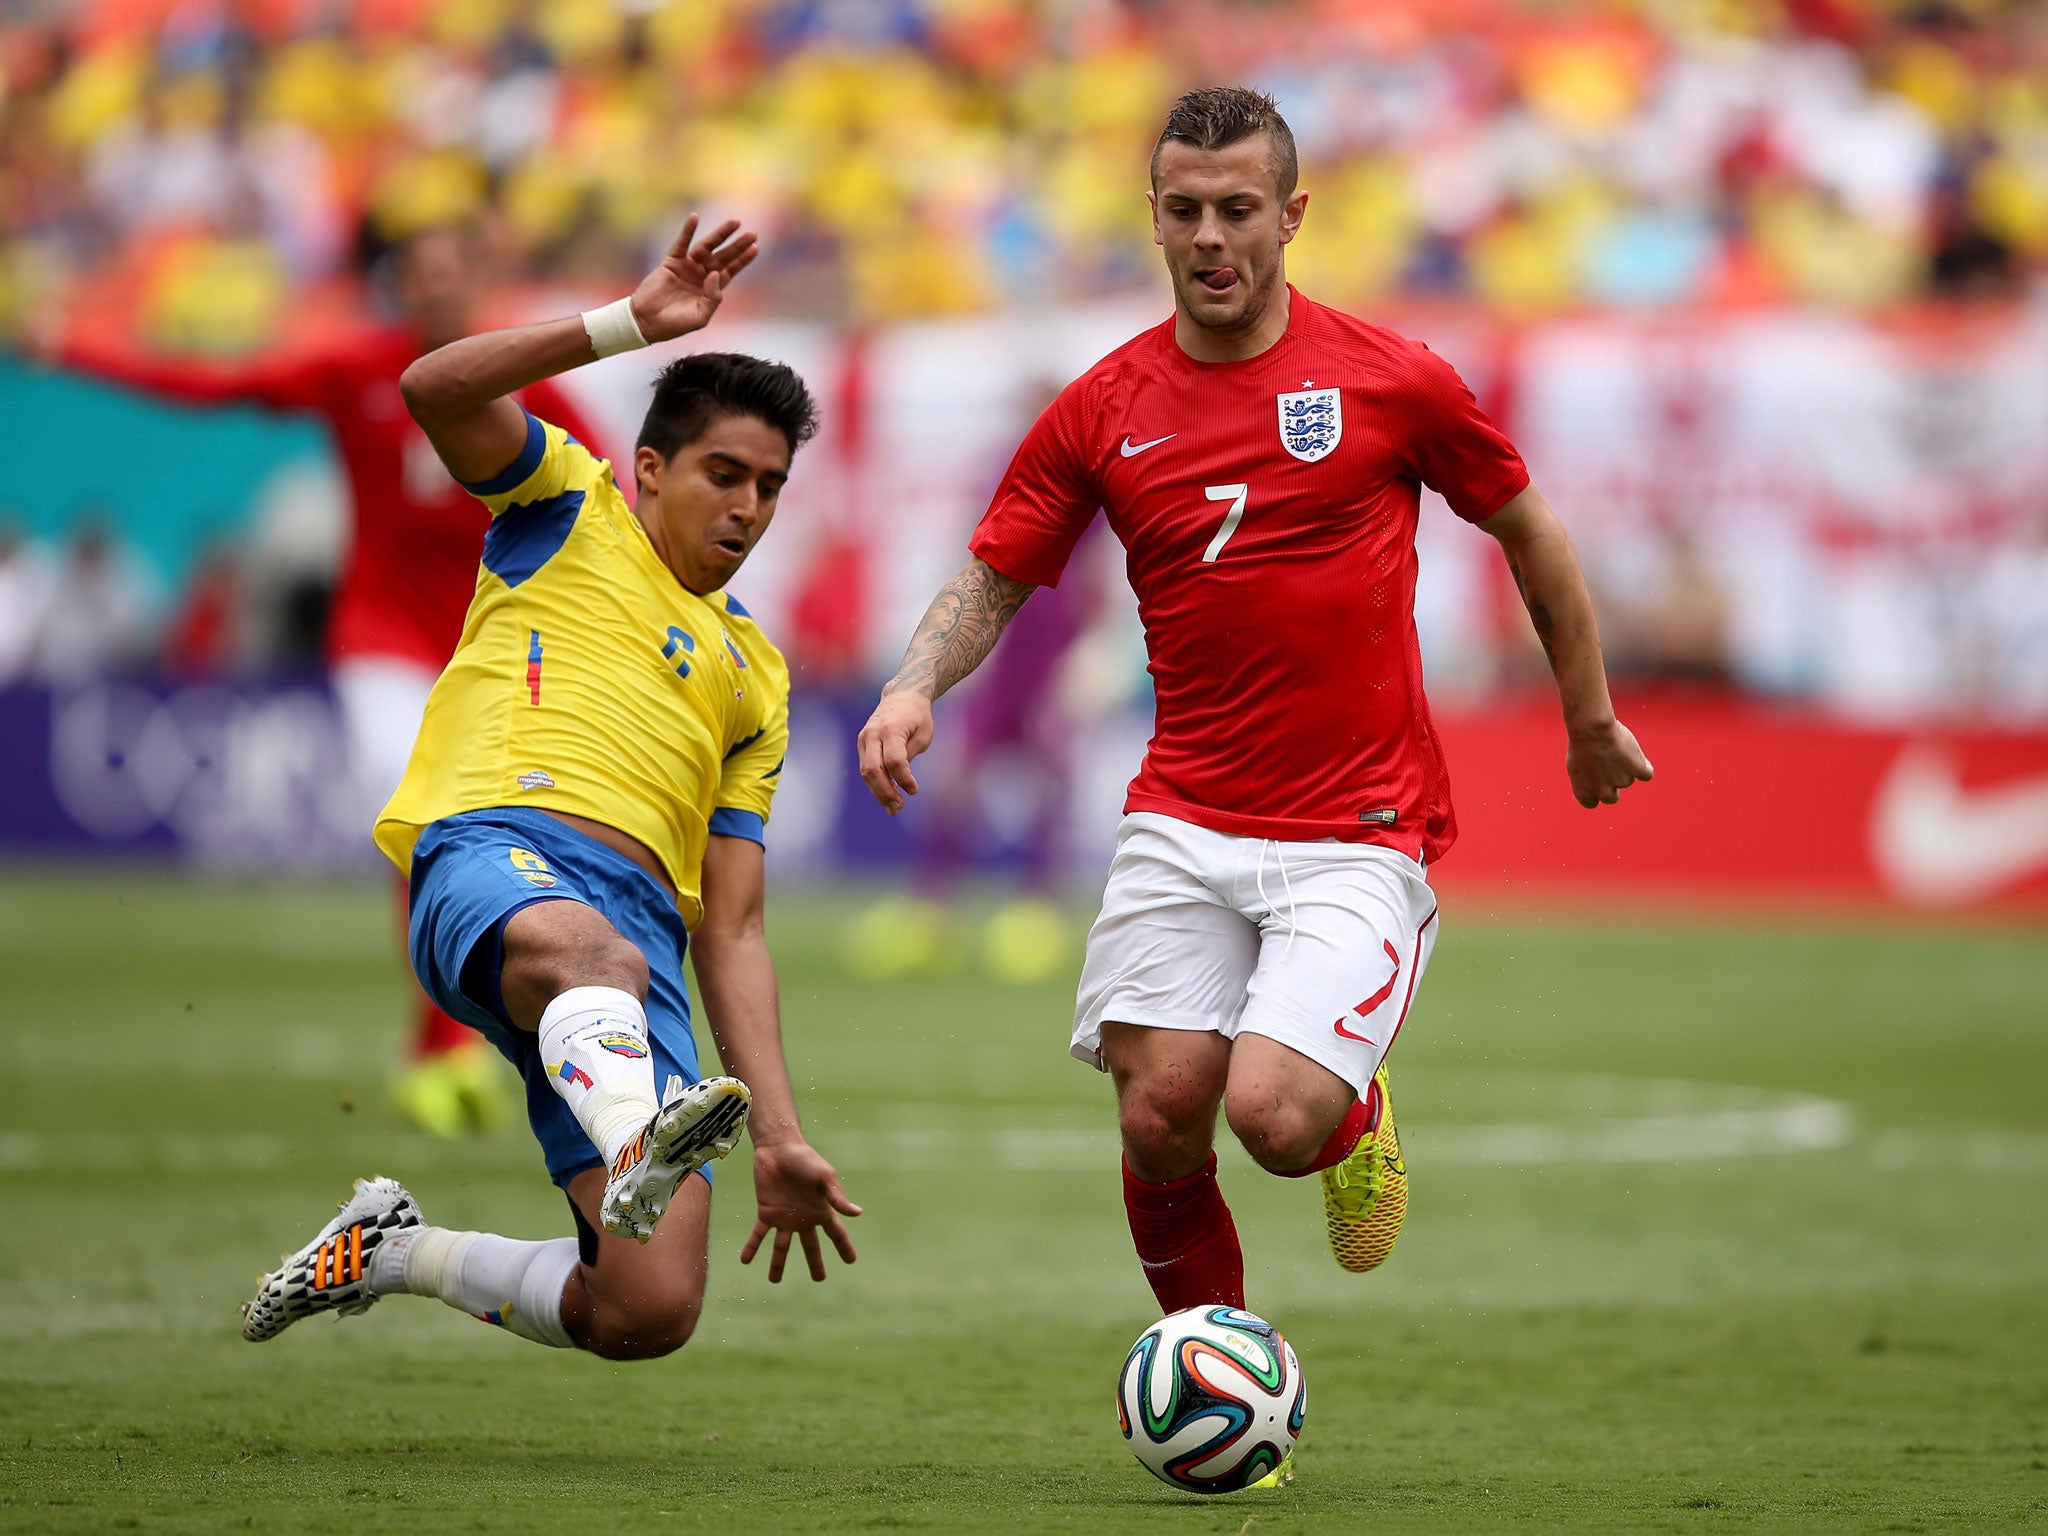 Jack Wilshere evades a tackle during the friendly match between England and Ecuador on June 4, 2014 in Miami Gardens.